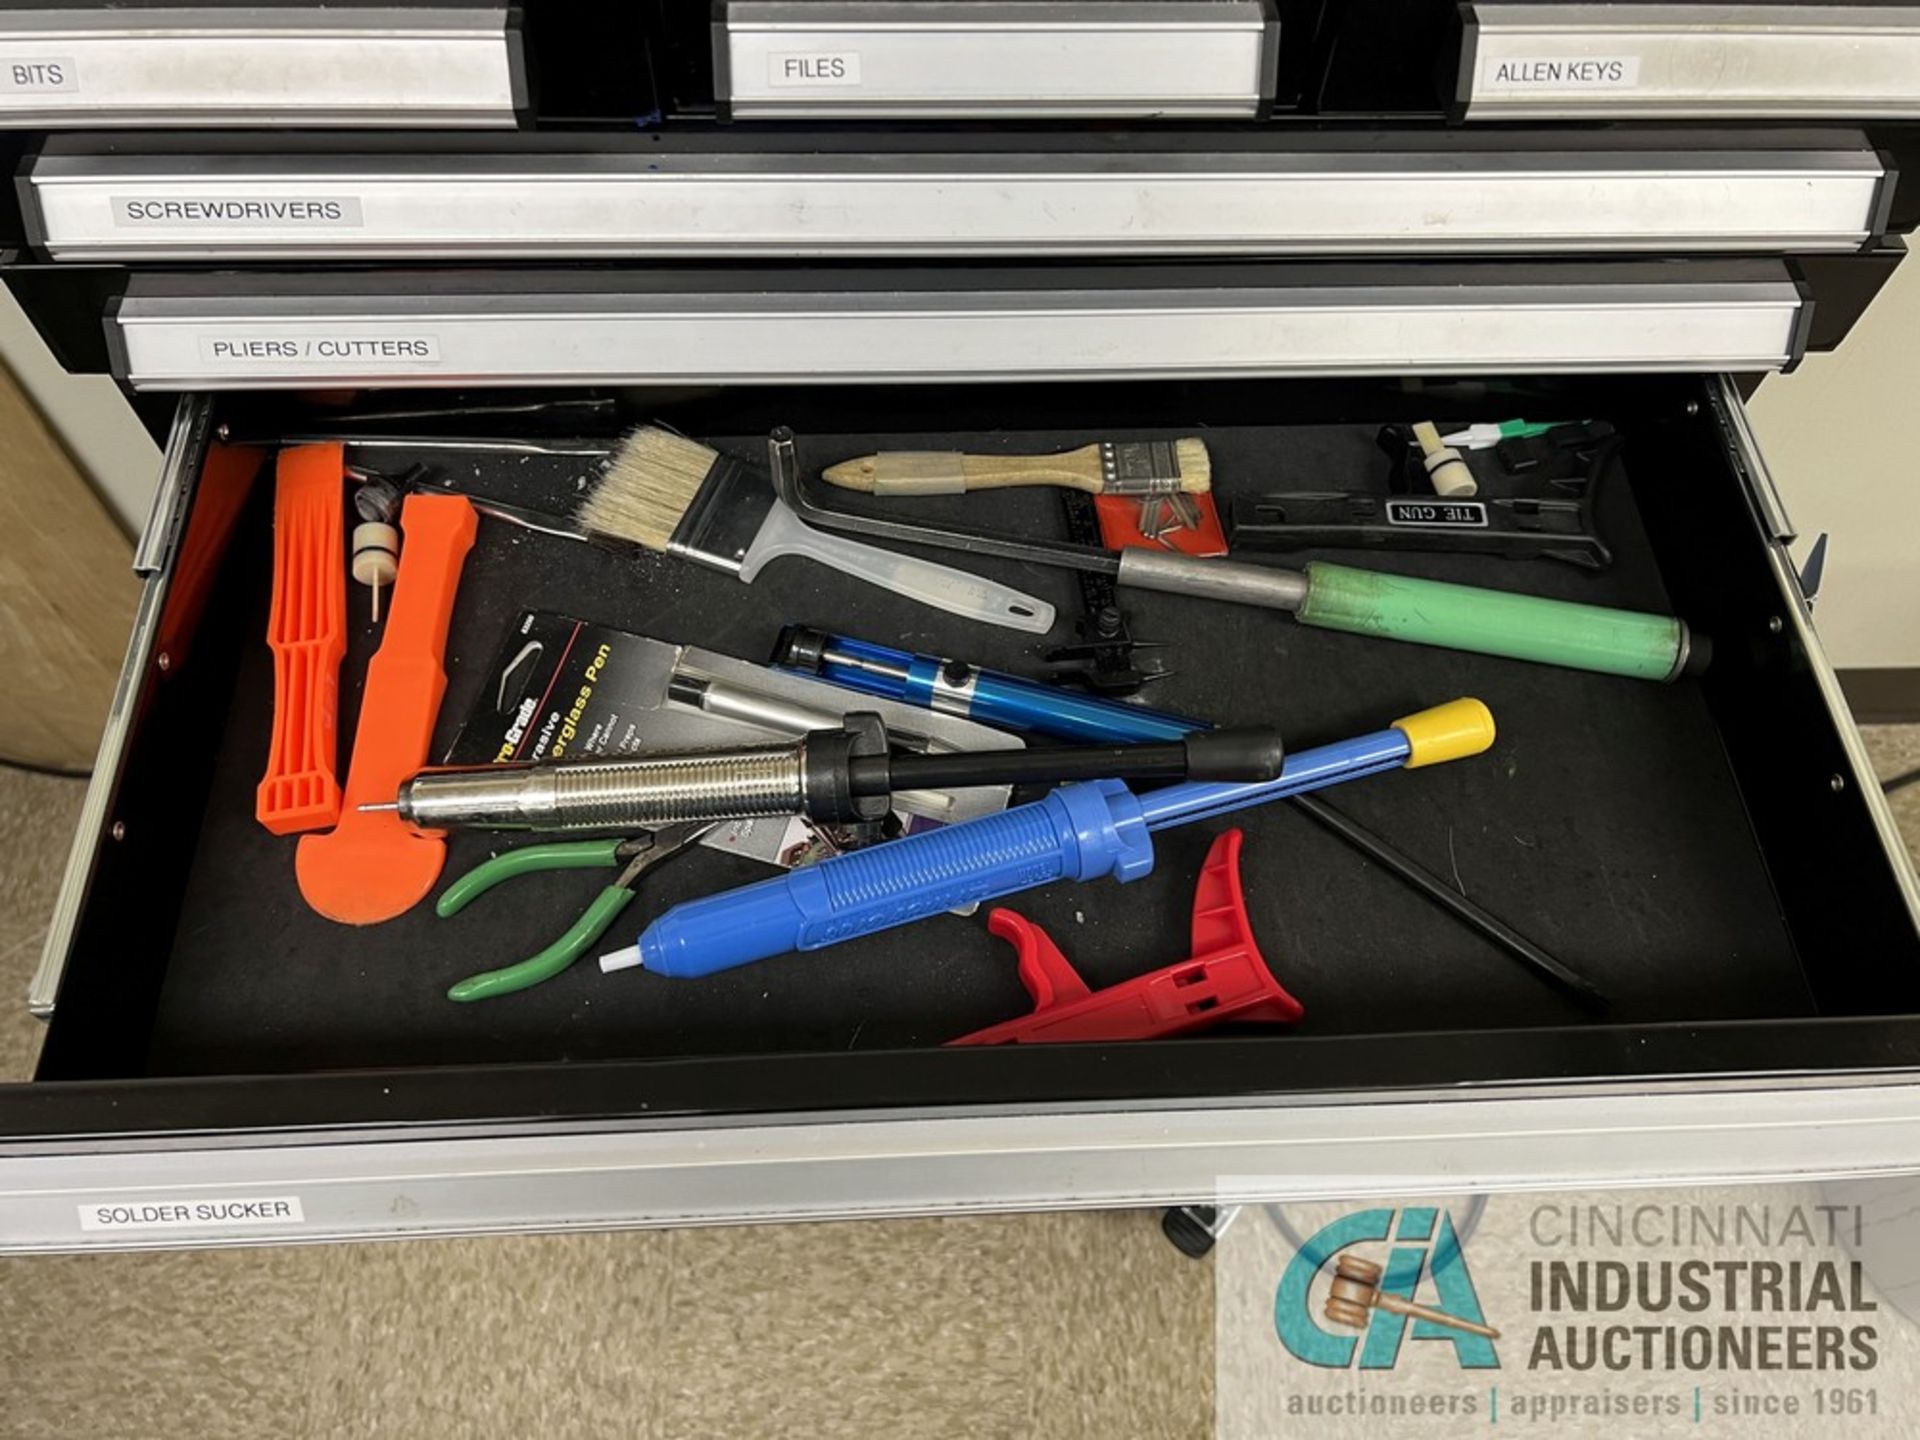 11-DRAWER HUSKY TOOLBOX WITH TOOLS (ENG LAB) - Image 6 of 11